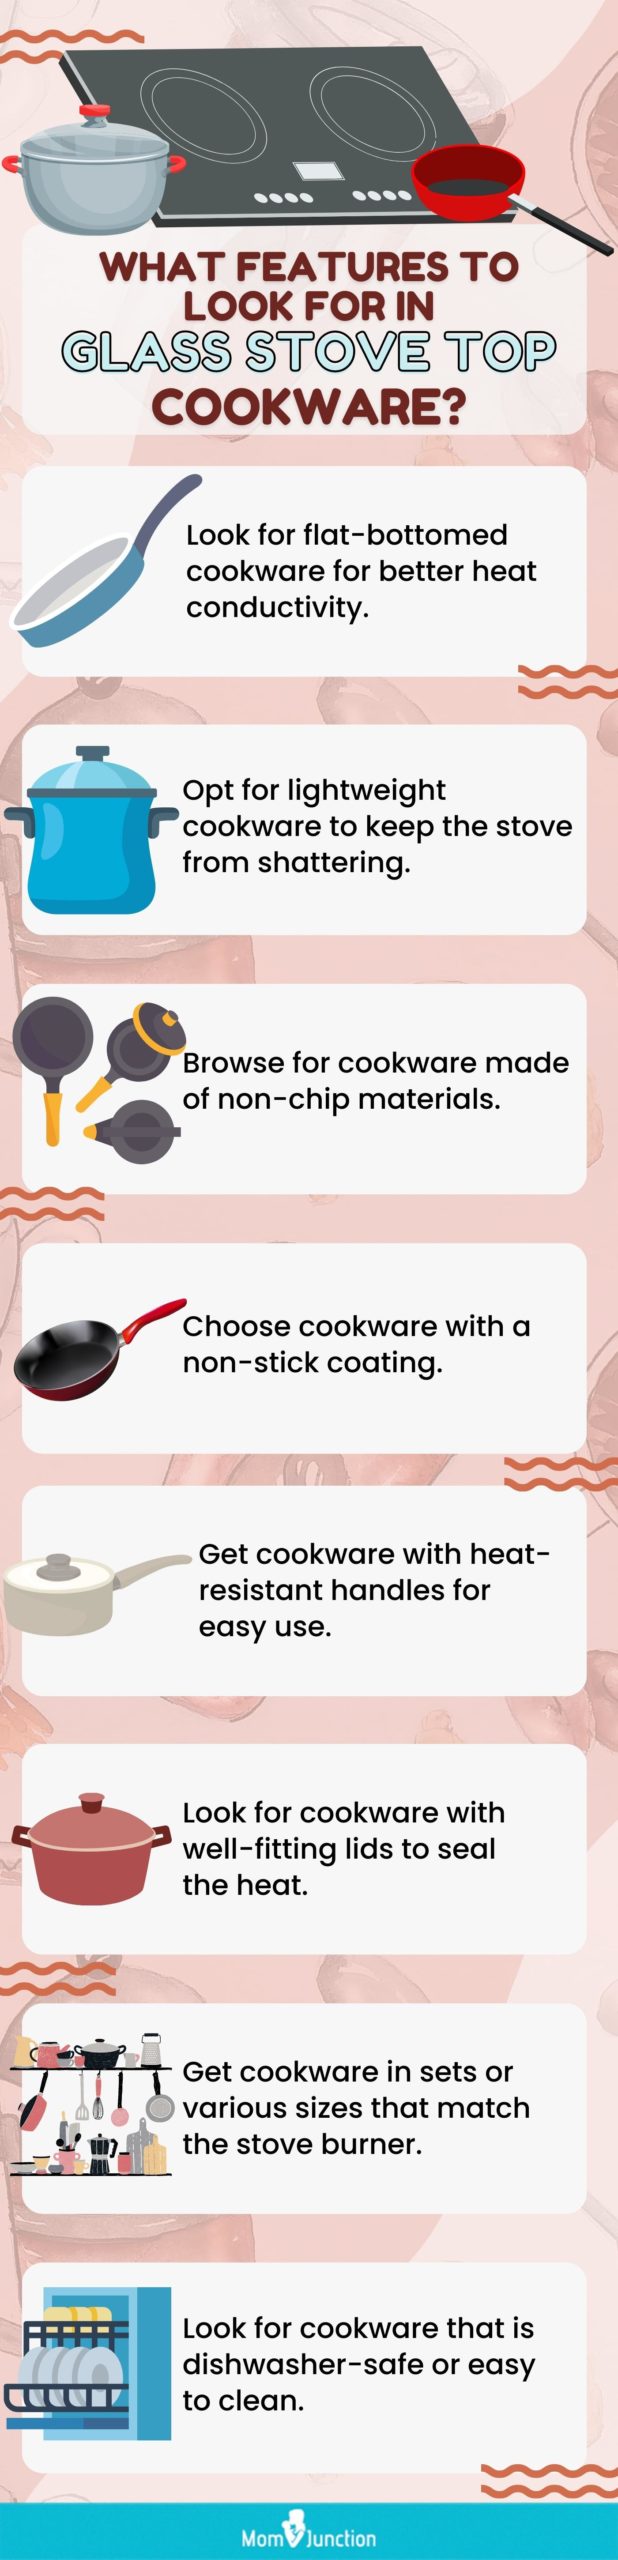 https://www.momjunction.com/wp-content/uploads/2021/03/Infographic-Tips-For-Choosing-Glass-Stove-Top-Cookware-scaled.jpg